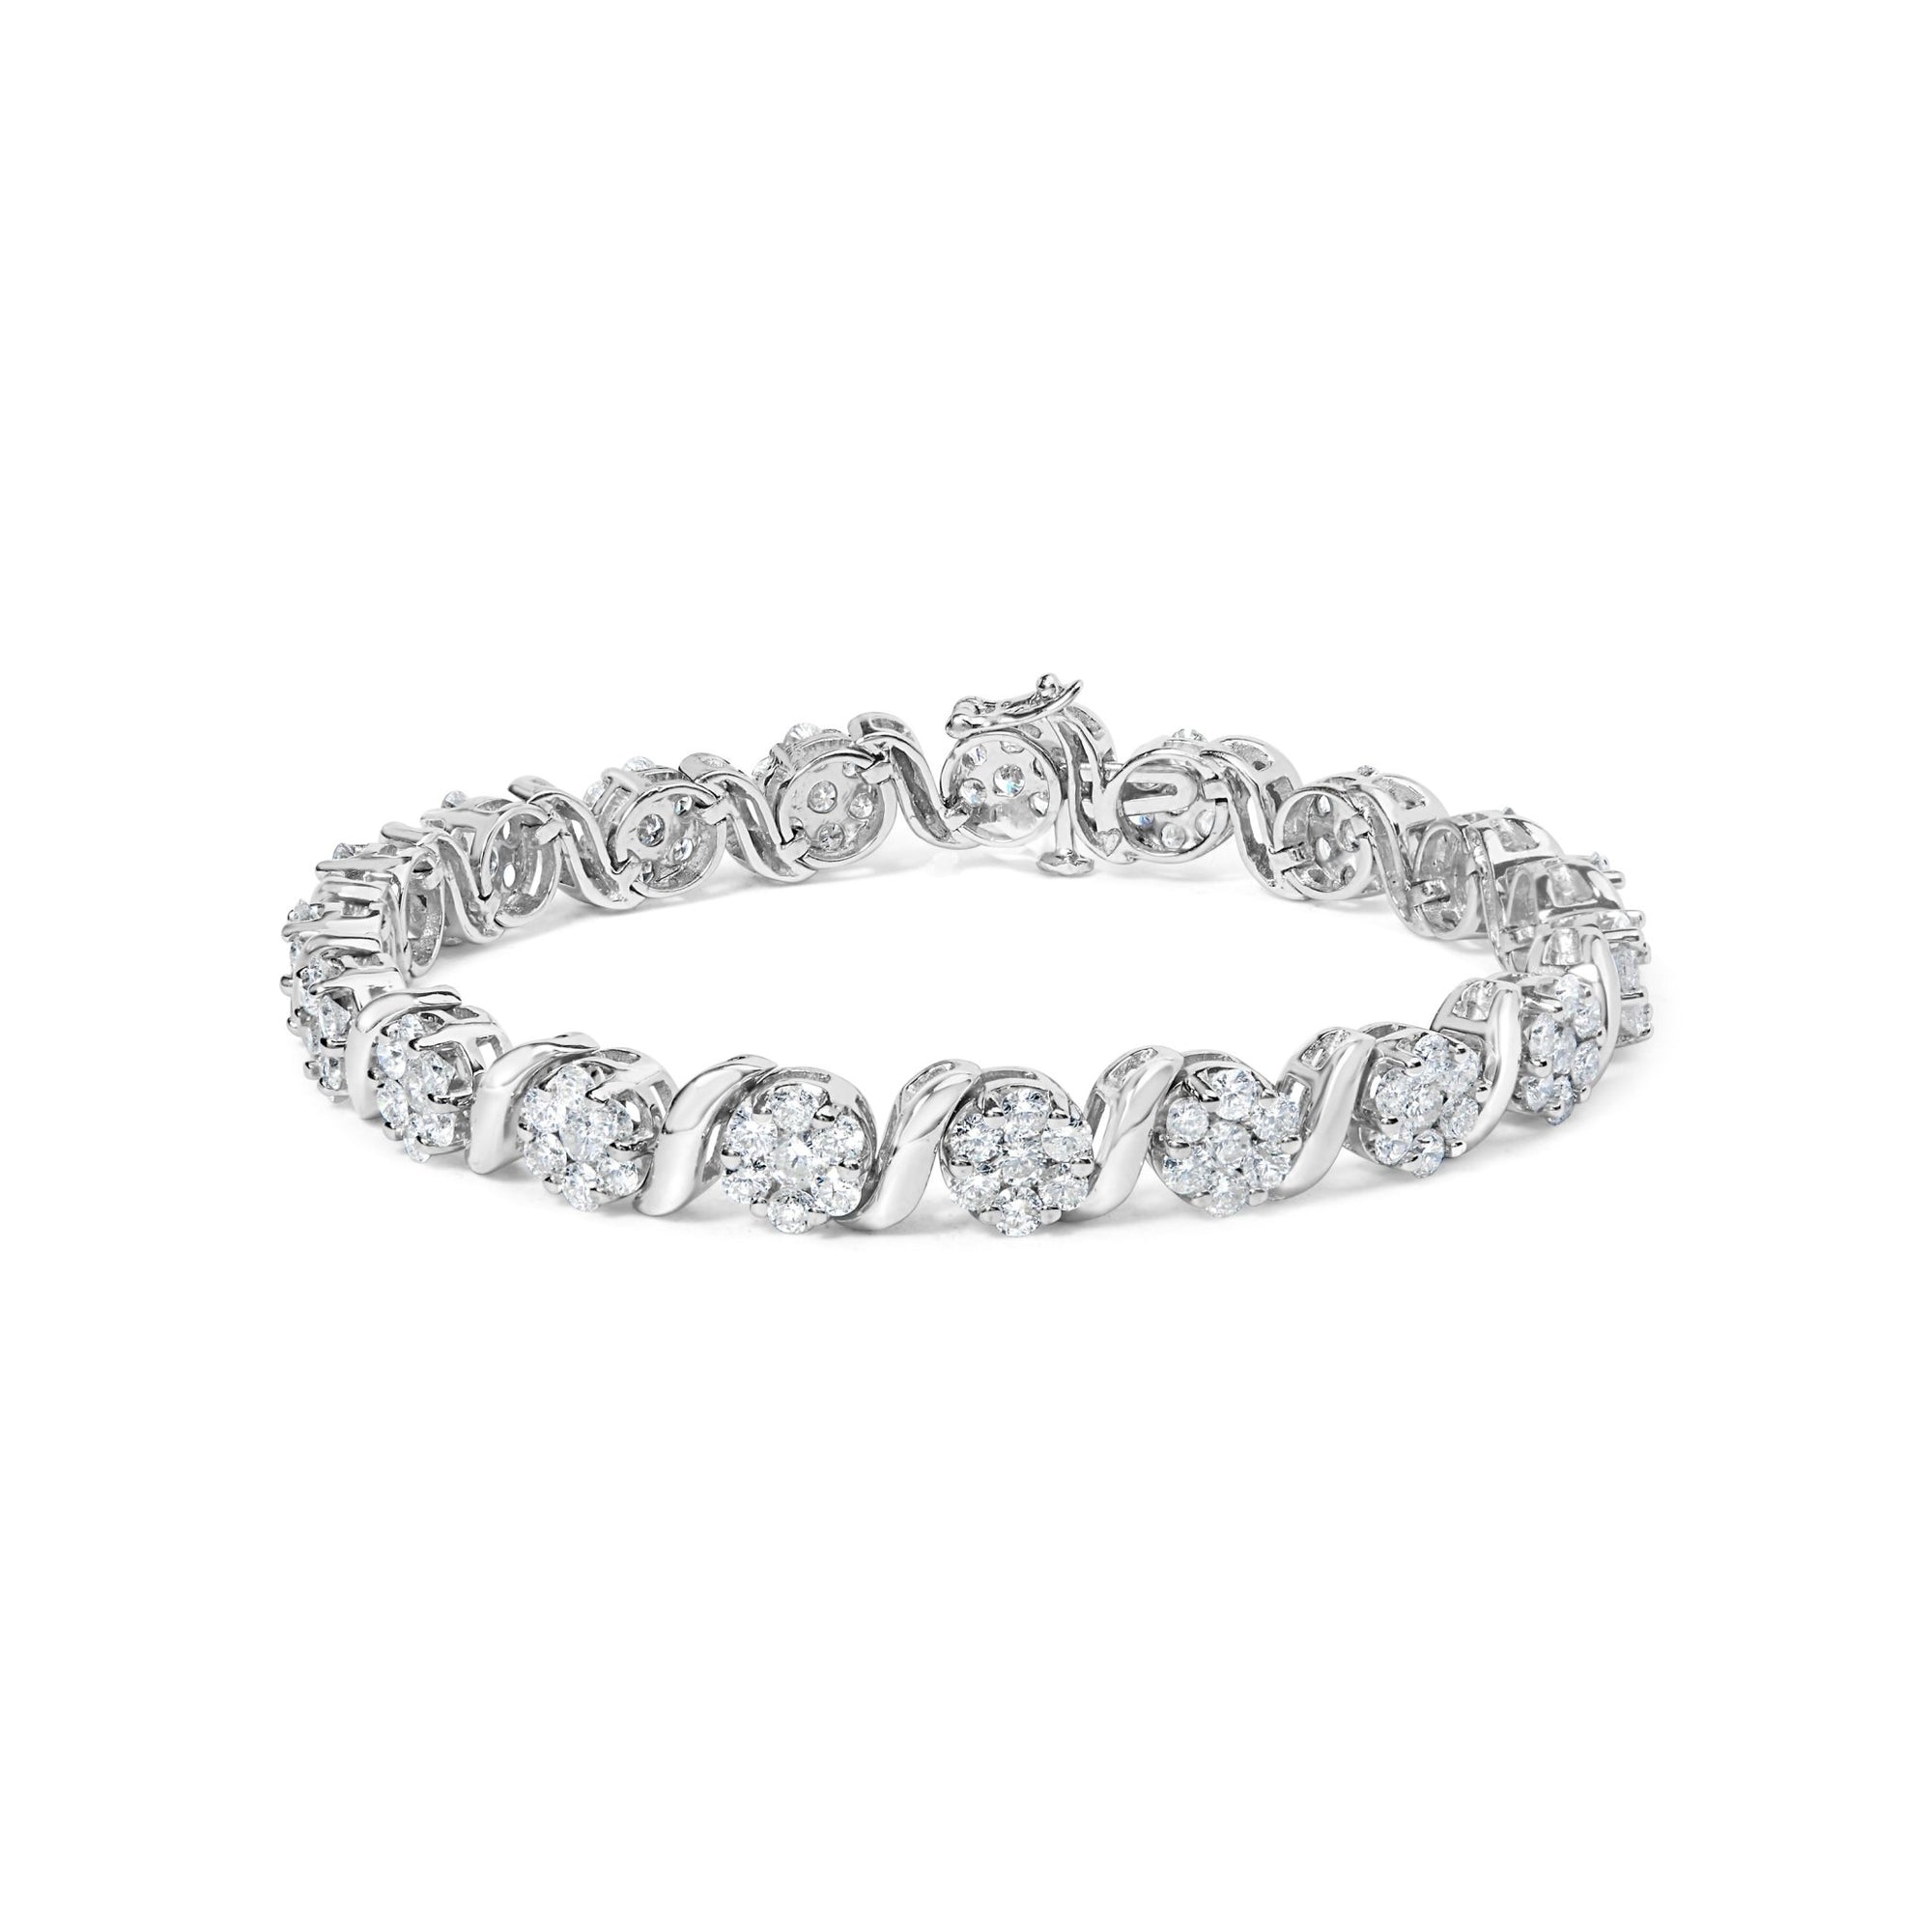 14K White Gold 7 3/8 Cttw Round Brilliant Diamond Floral Cluster and S Link Bracelet (H-I Color, SI2-I1 Clarity) - 7" Inches - LinkagejewelrydesignLinkagejewelrydesign